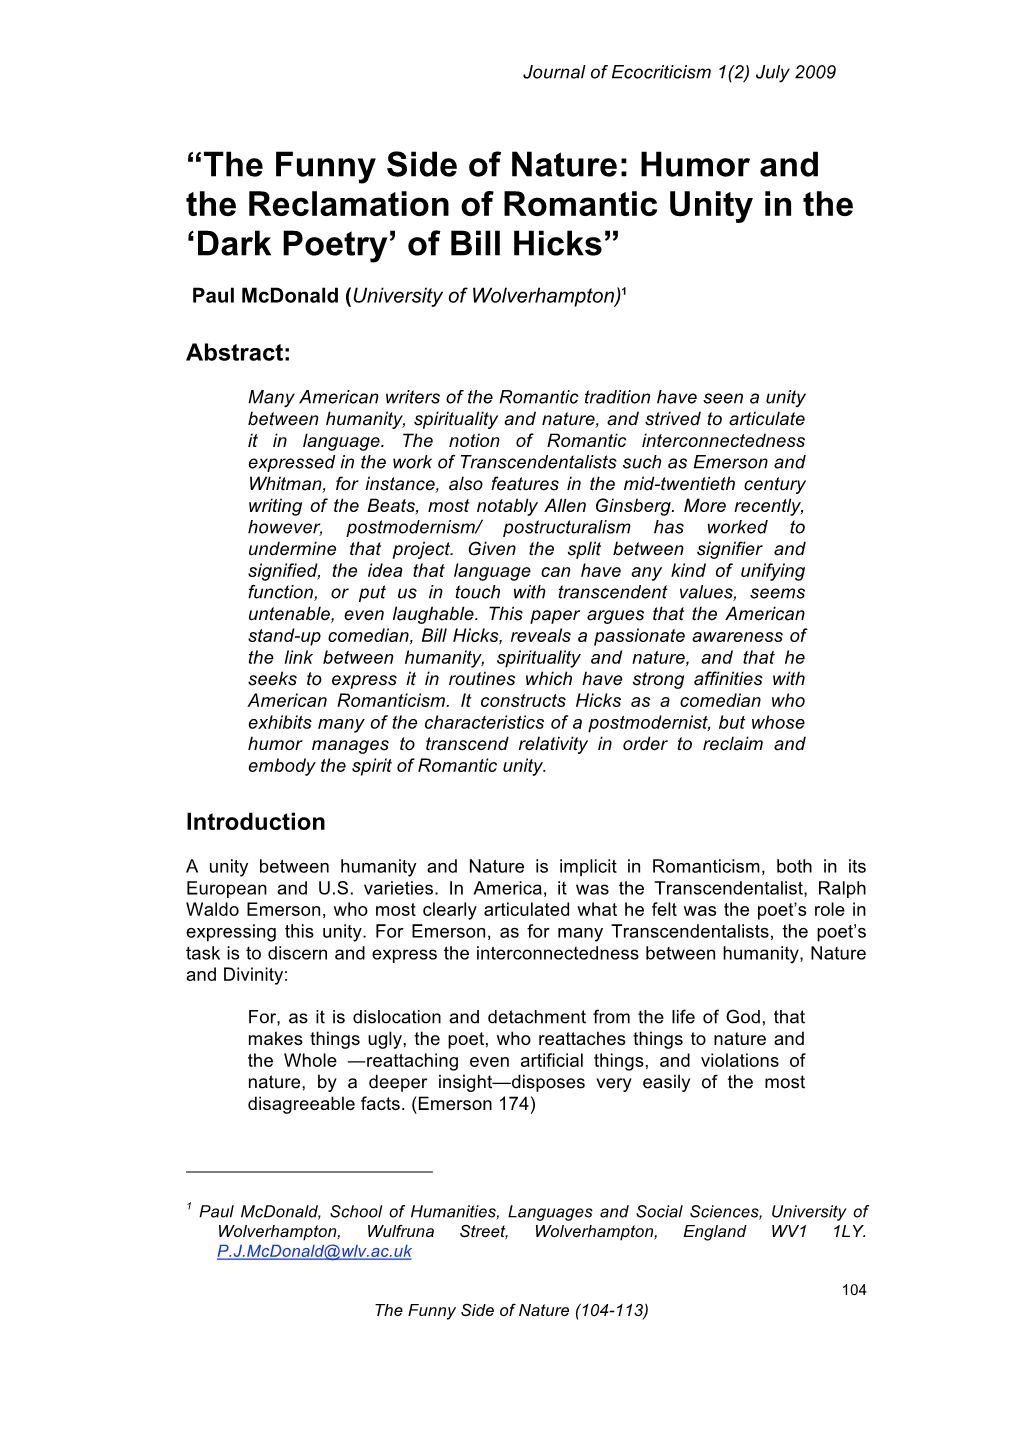 The Funny Side of Nature: Humor and the Reclamation of Romantic Unity in the ‘Dark Poetry’ of Bill Hicks”